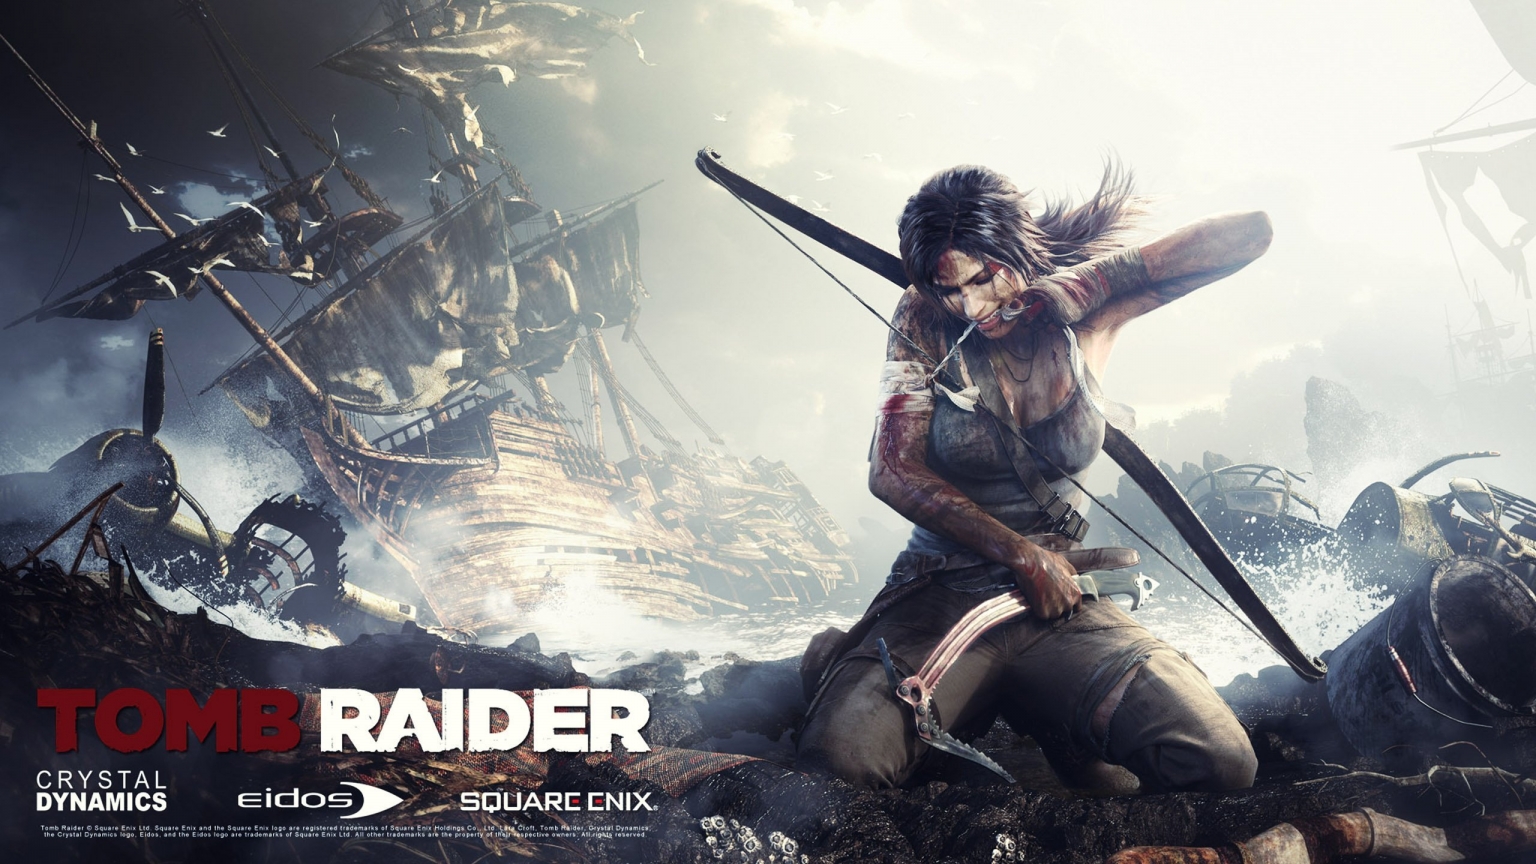 Tomb Raider Weapons Unlocked for 1536 x 864 HDTV resolution